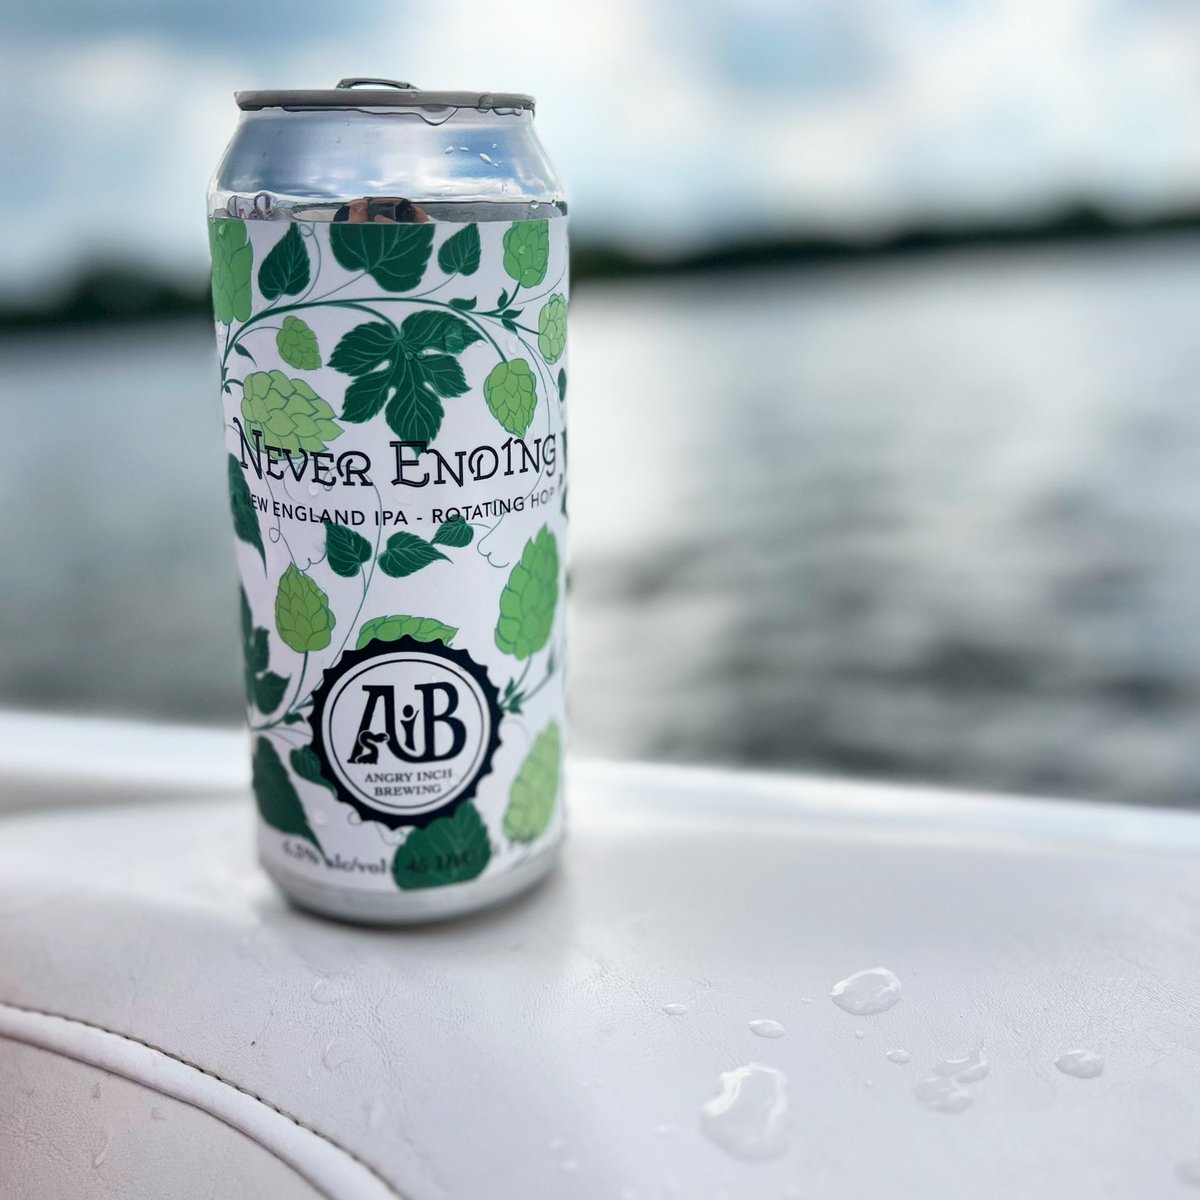 When it’s too nice to be inside, take your beer with you outside! ☀️🍻#lakelife #mncraftbeer